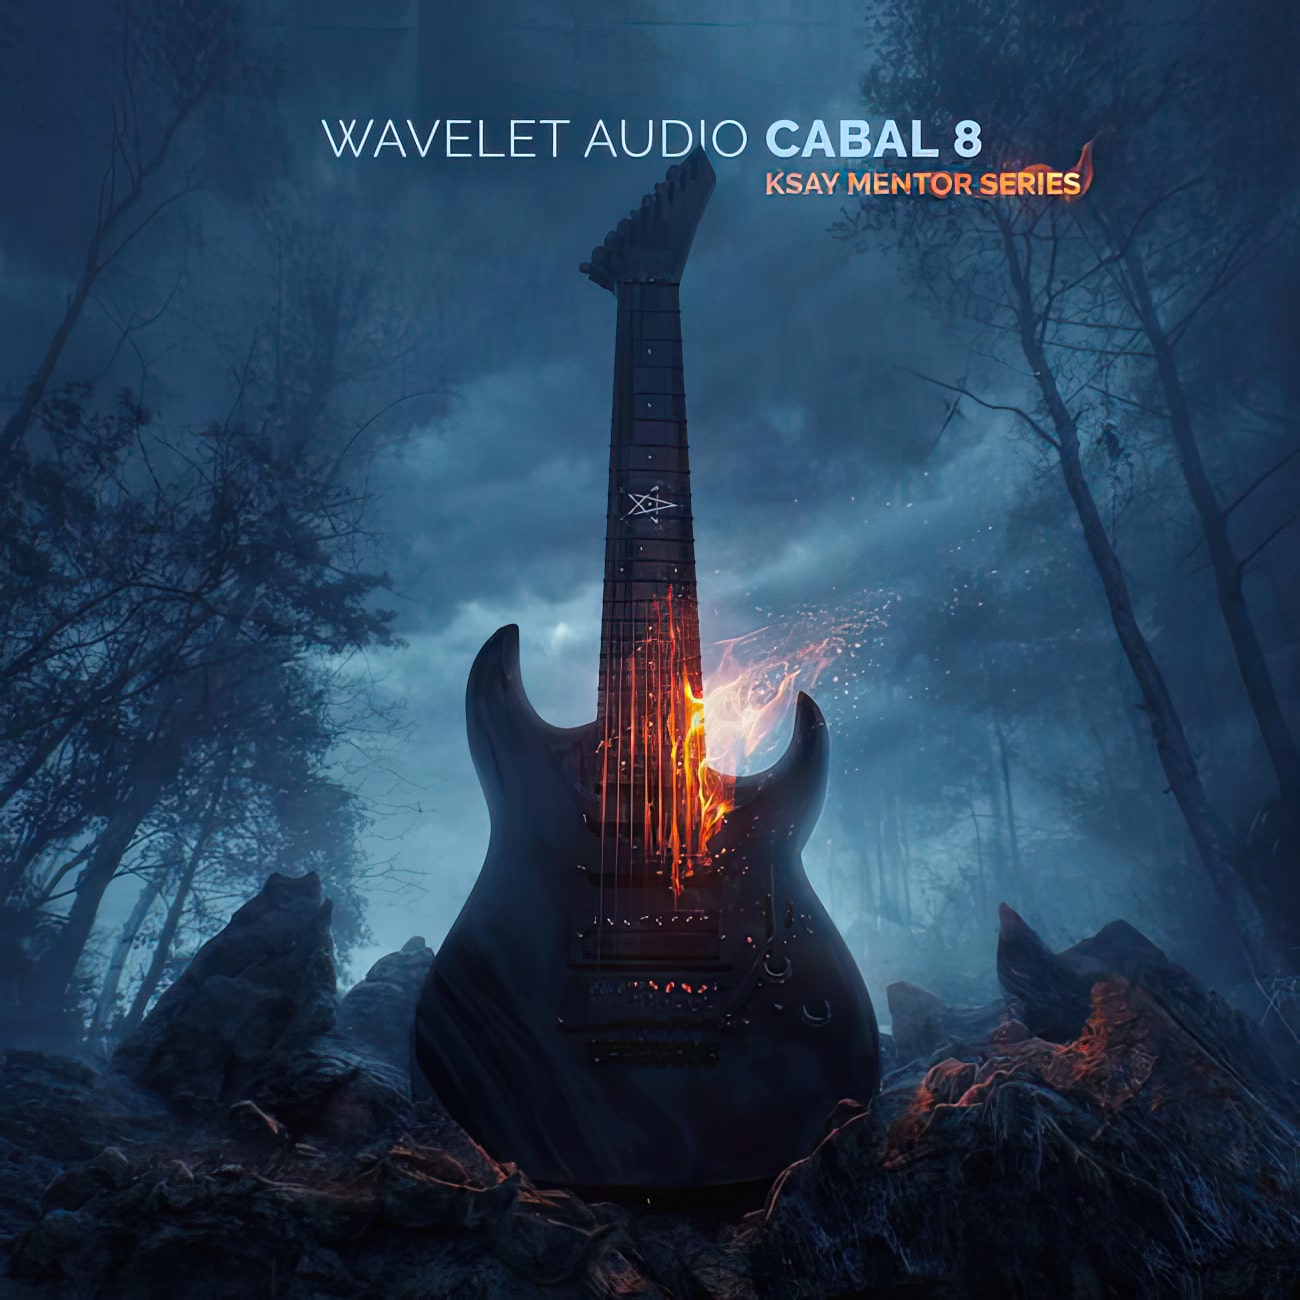 50% off “Cabal 8” by Wavelet Audio